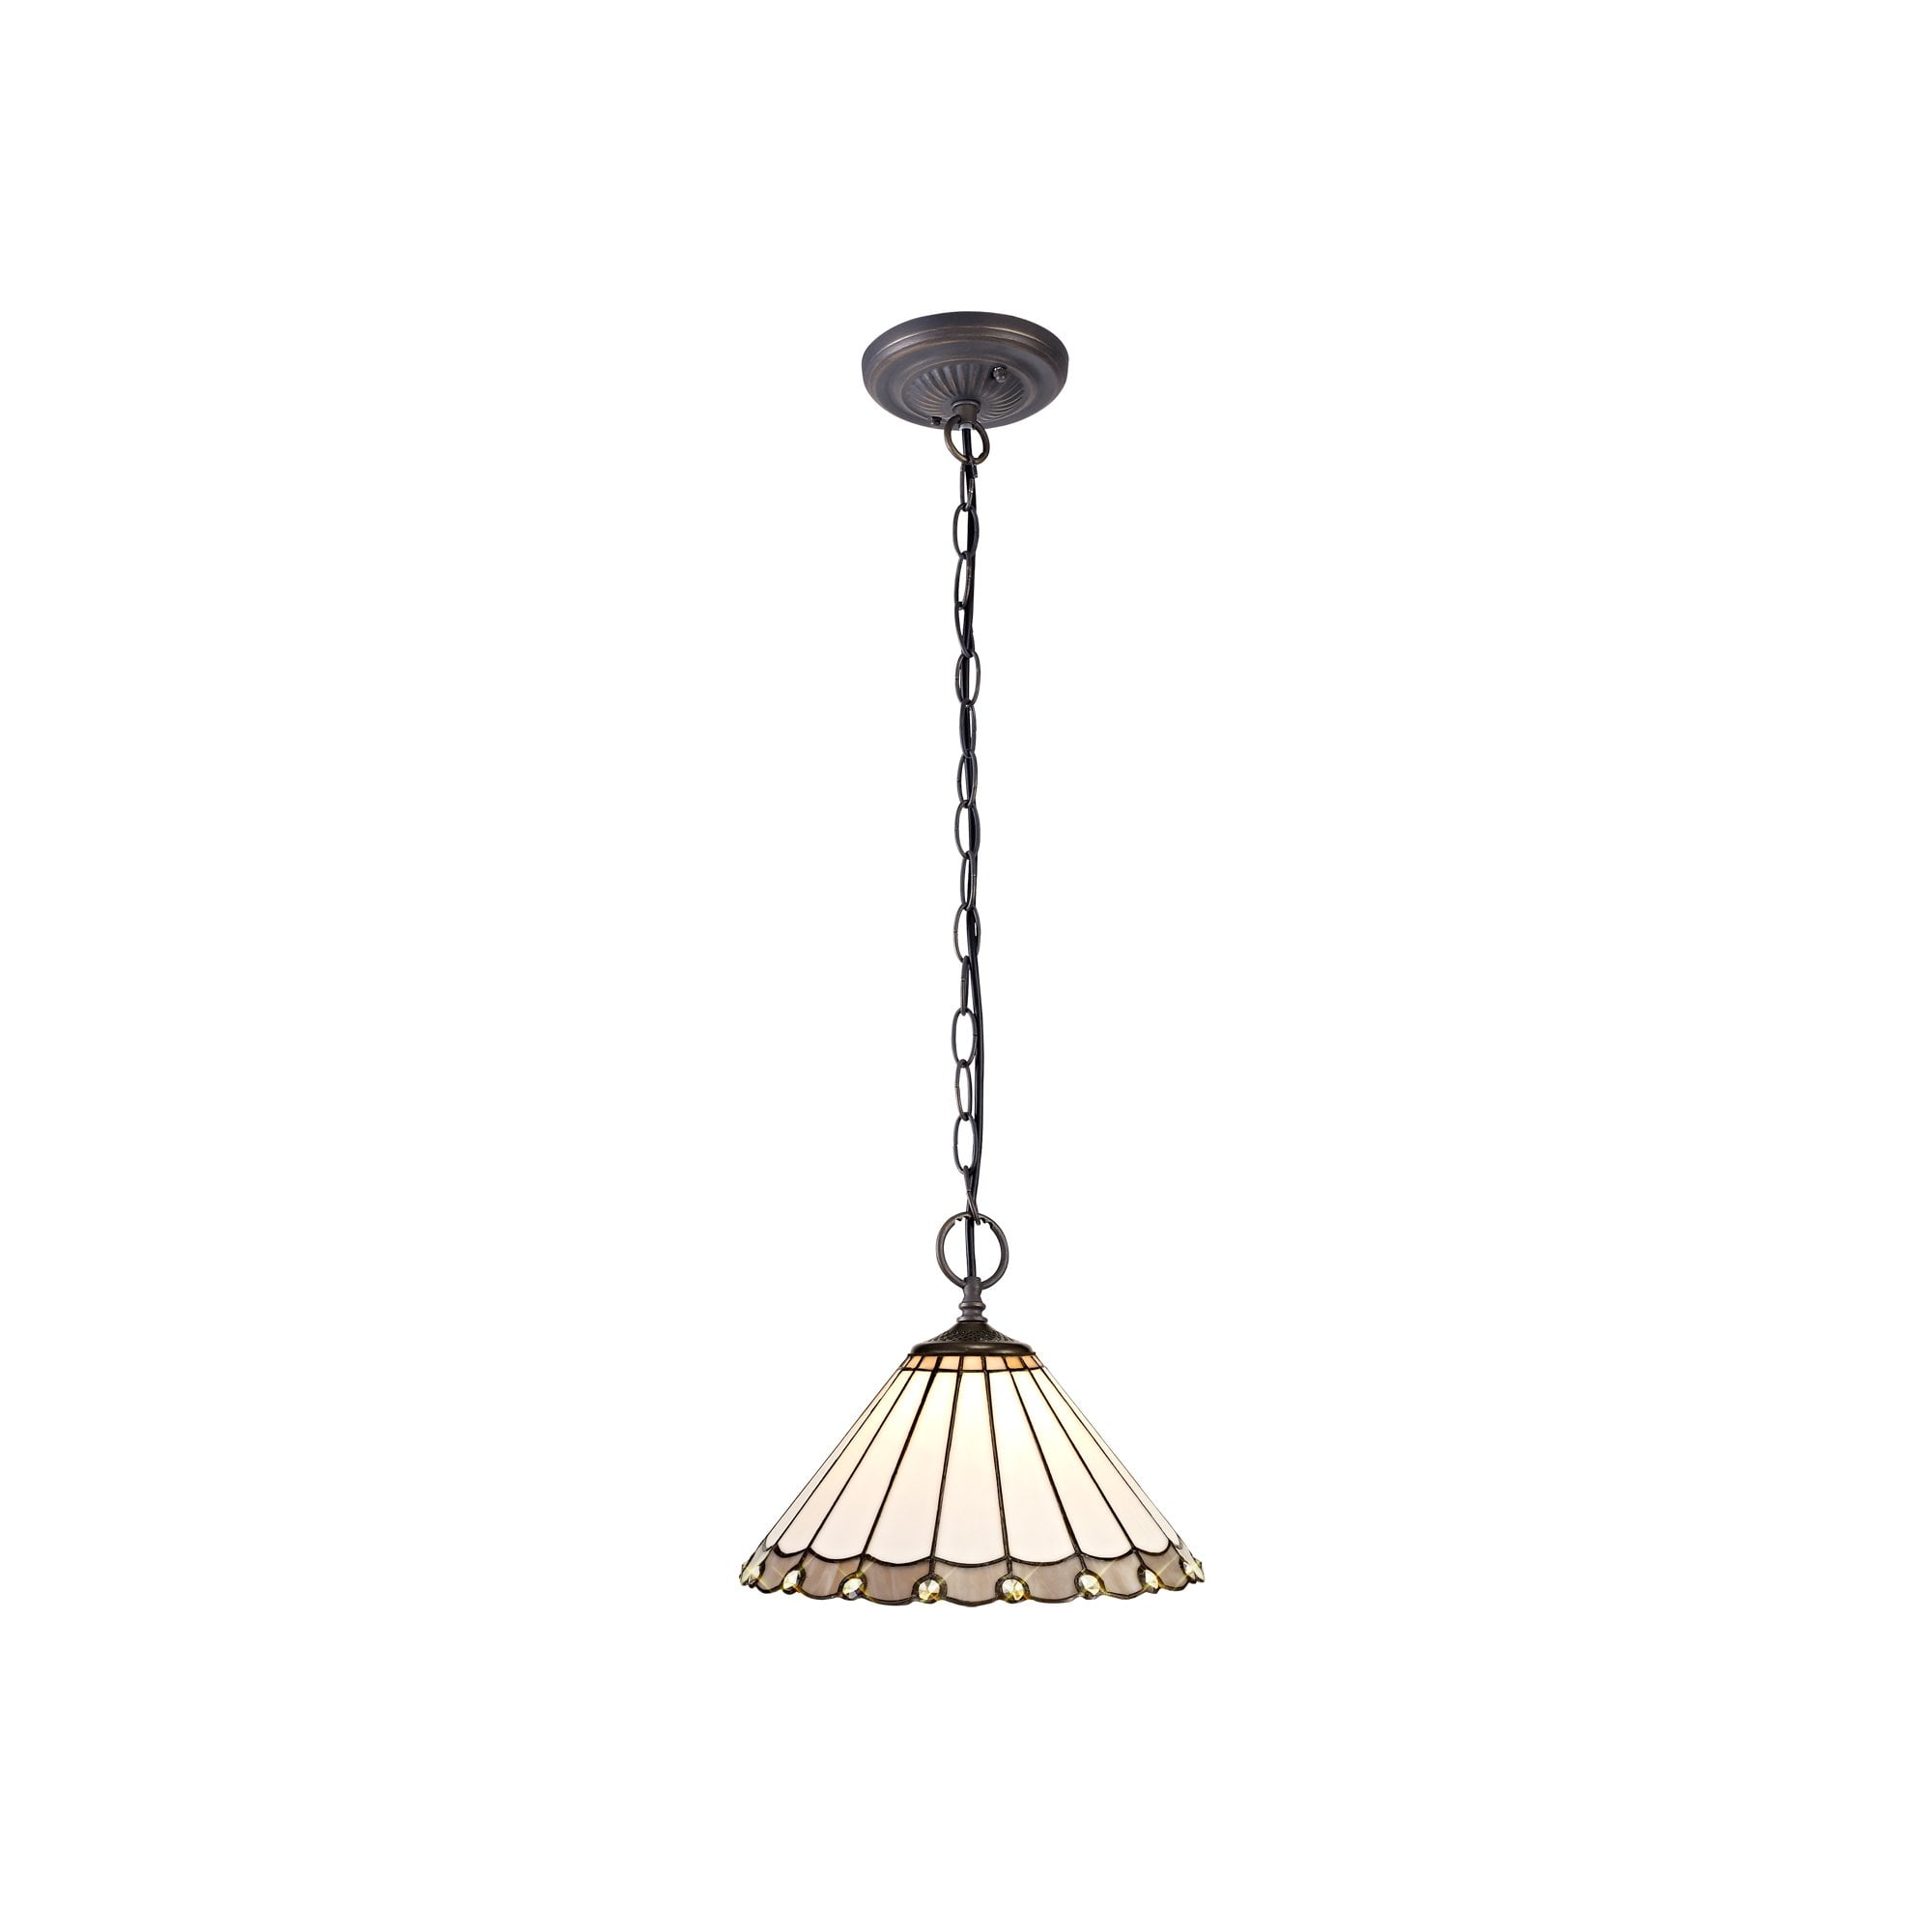 2 Light Downlighter Pendant E27 With 30cm Tiffany Shade, Grey/Cream/Crystal/Aged Antique Brass